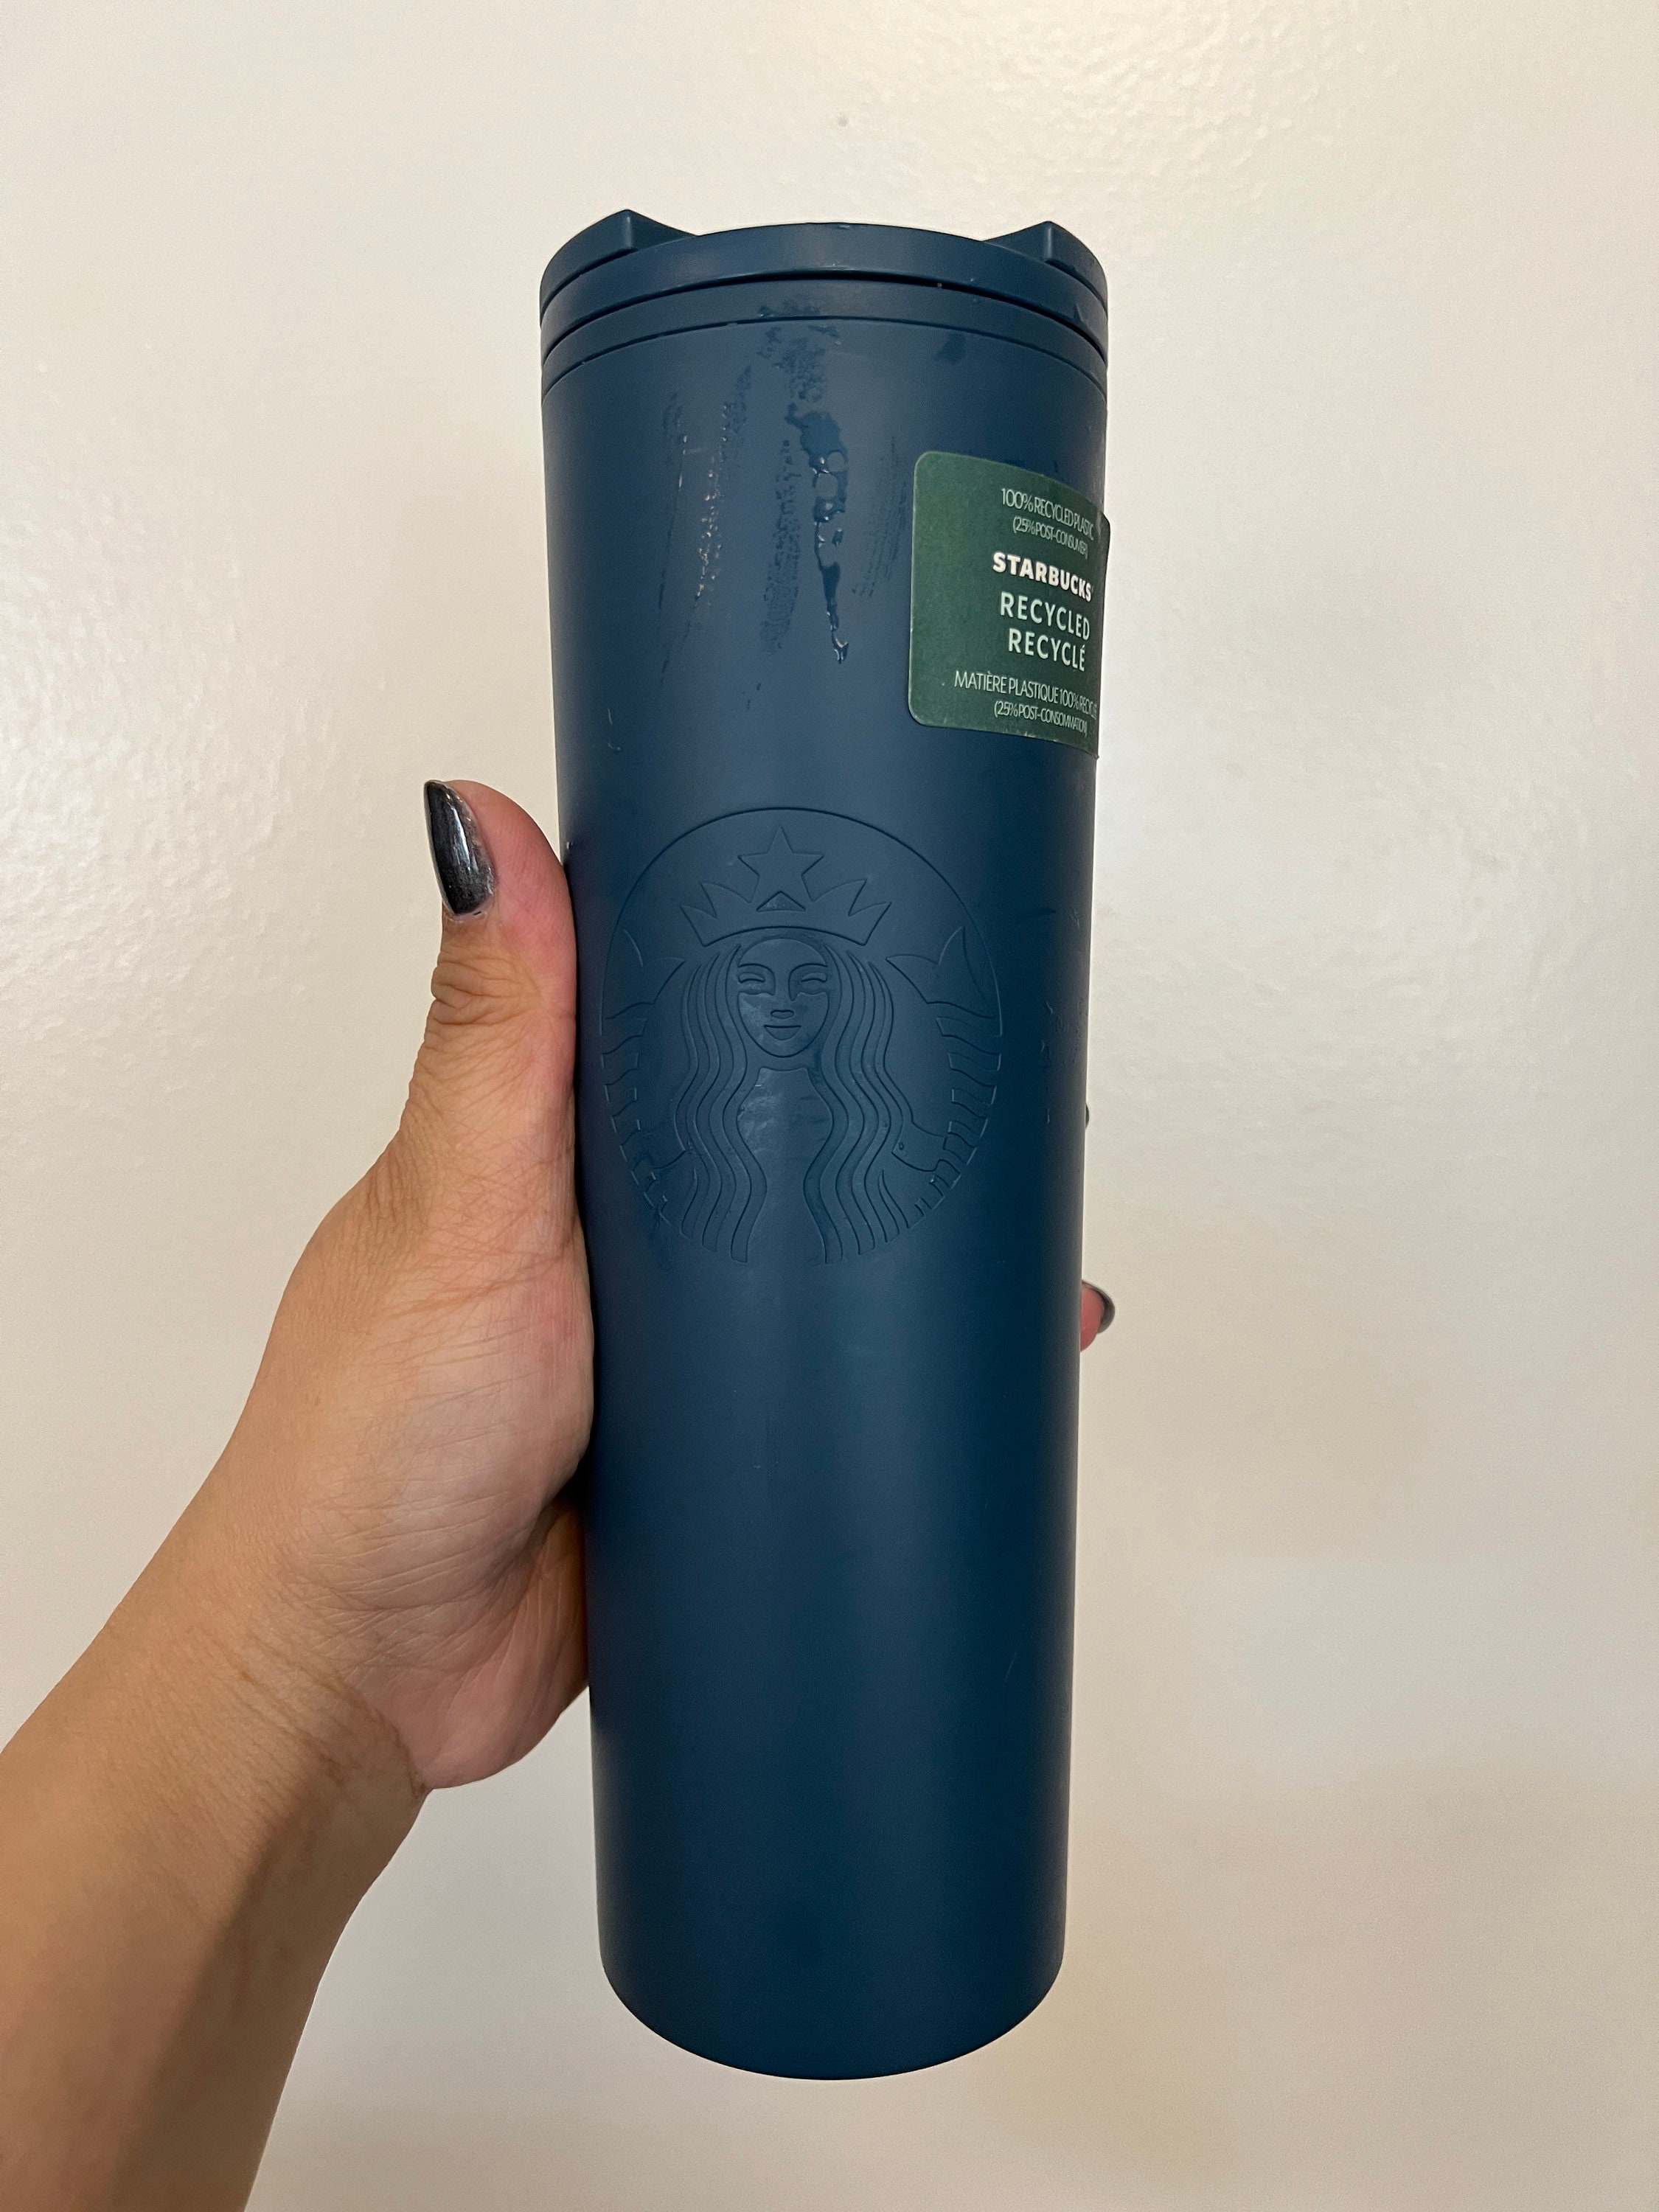 Starbucks Iconic 20oz Stainless Steel Thermos Mug for Coffee Lovers, Travel  Cold and Hot Coffee Tumbler for Gift 